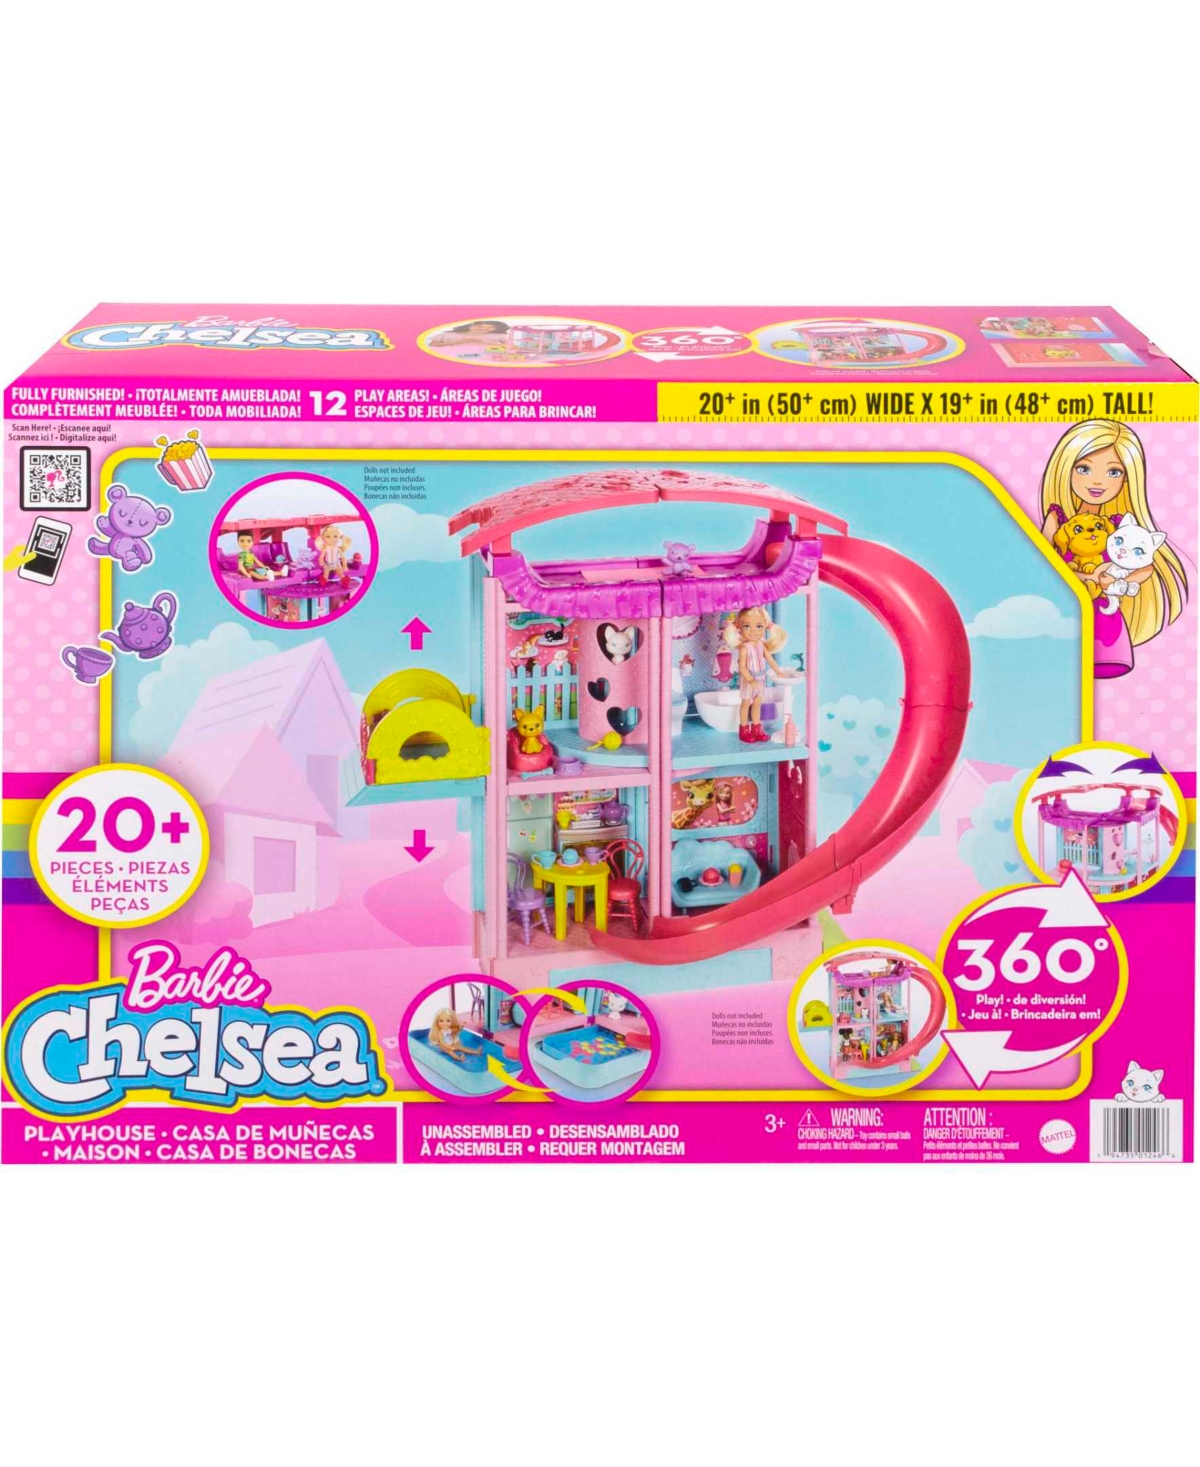 Shop Barbie Chelsea Playhouse With Slide, Pool, Ball Pit, Pet Puppy & Kitten, Elevator, And Accessories In Multi